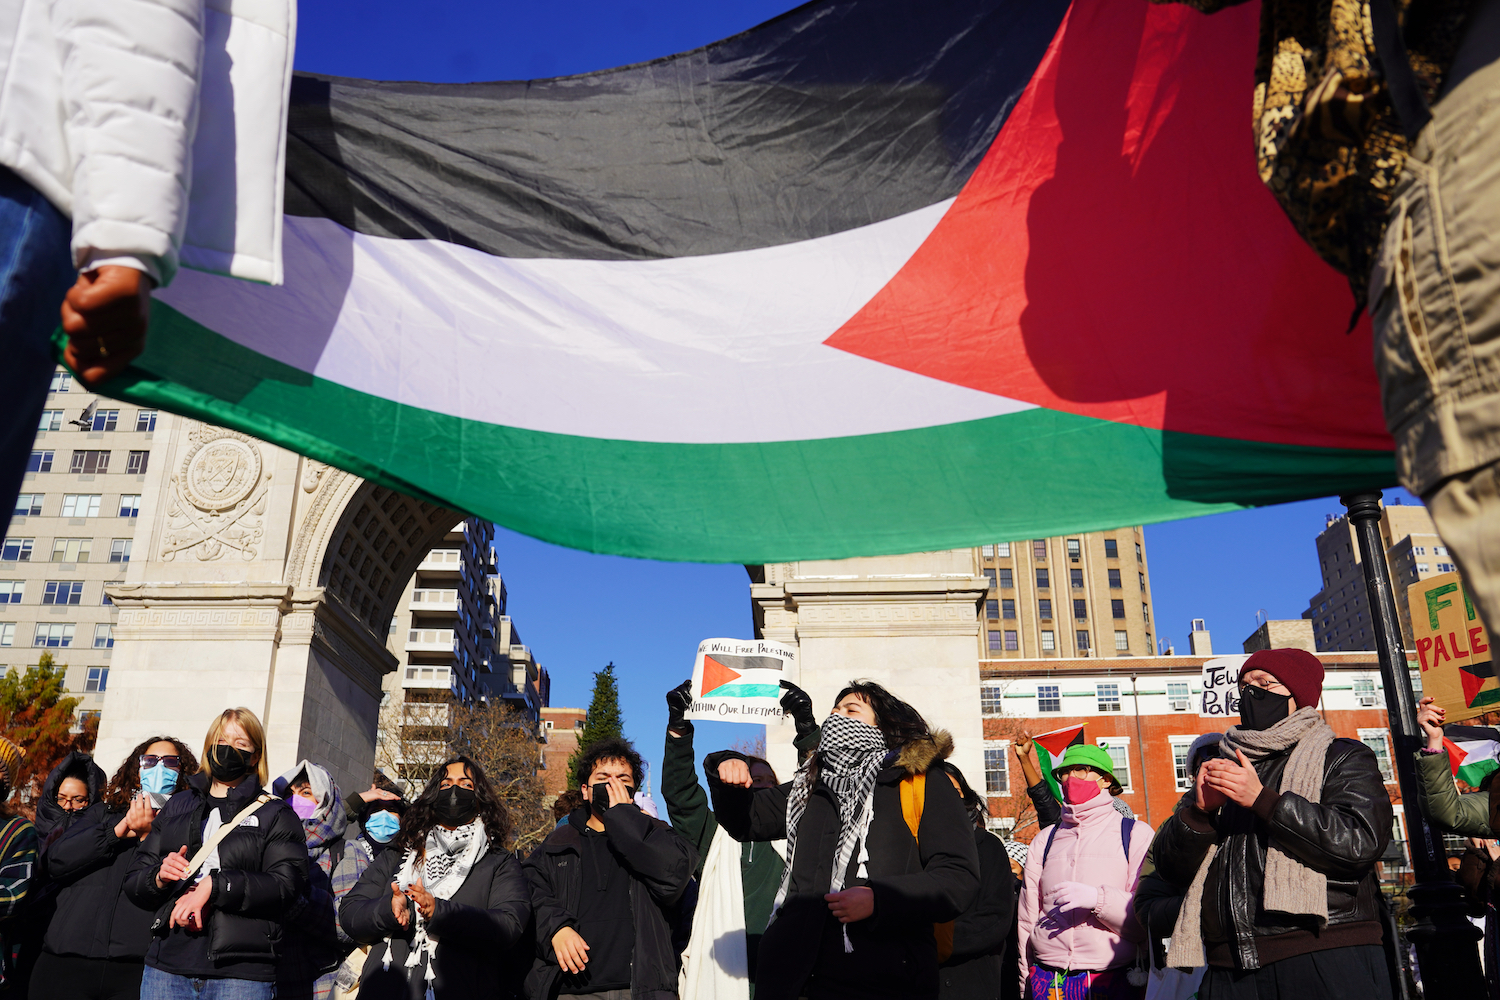 People are standing in front of the Washington Square Arch beneath a large Palestinian flag.